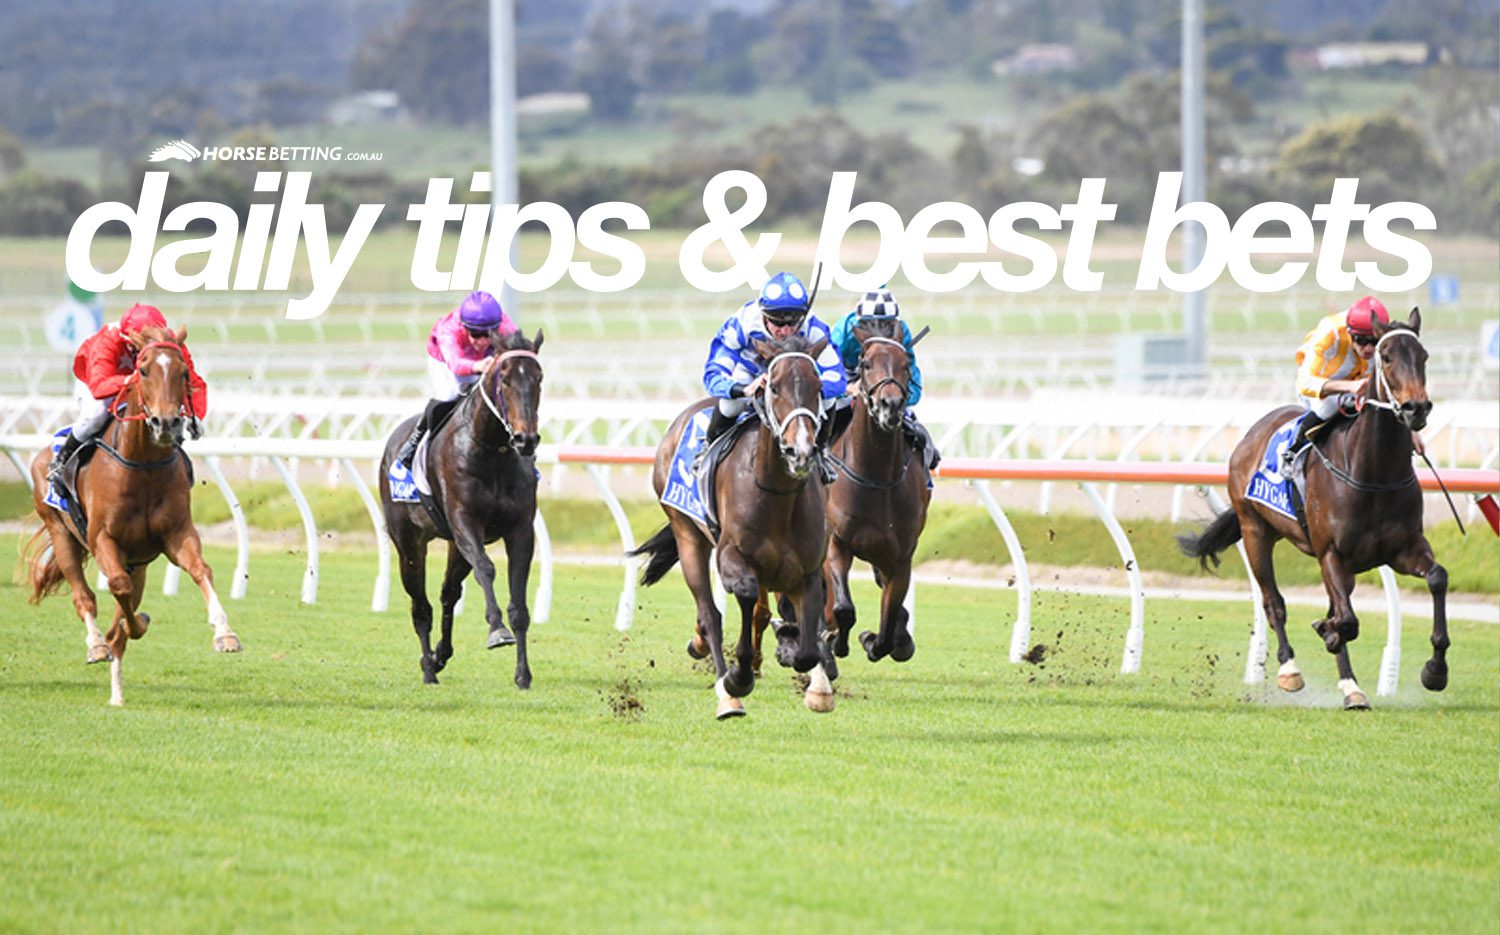 Thursday free horse racing betting tips